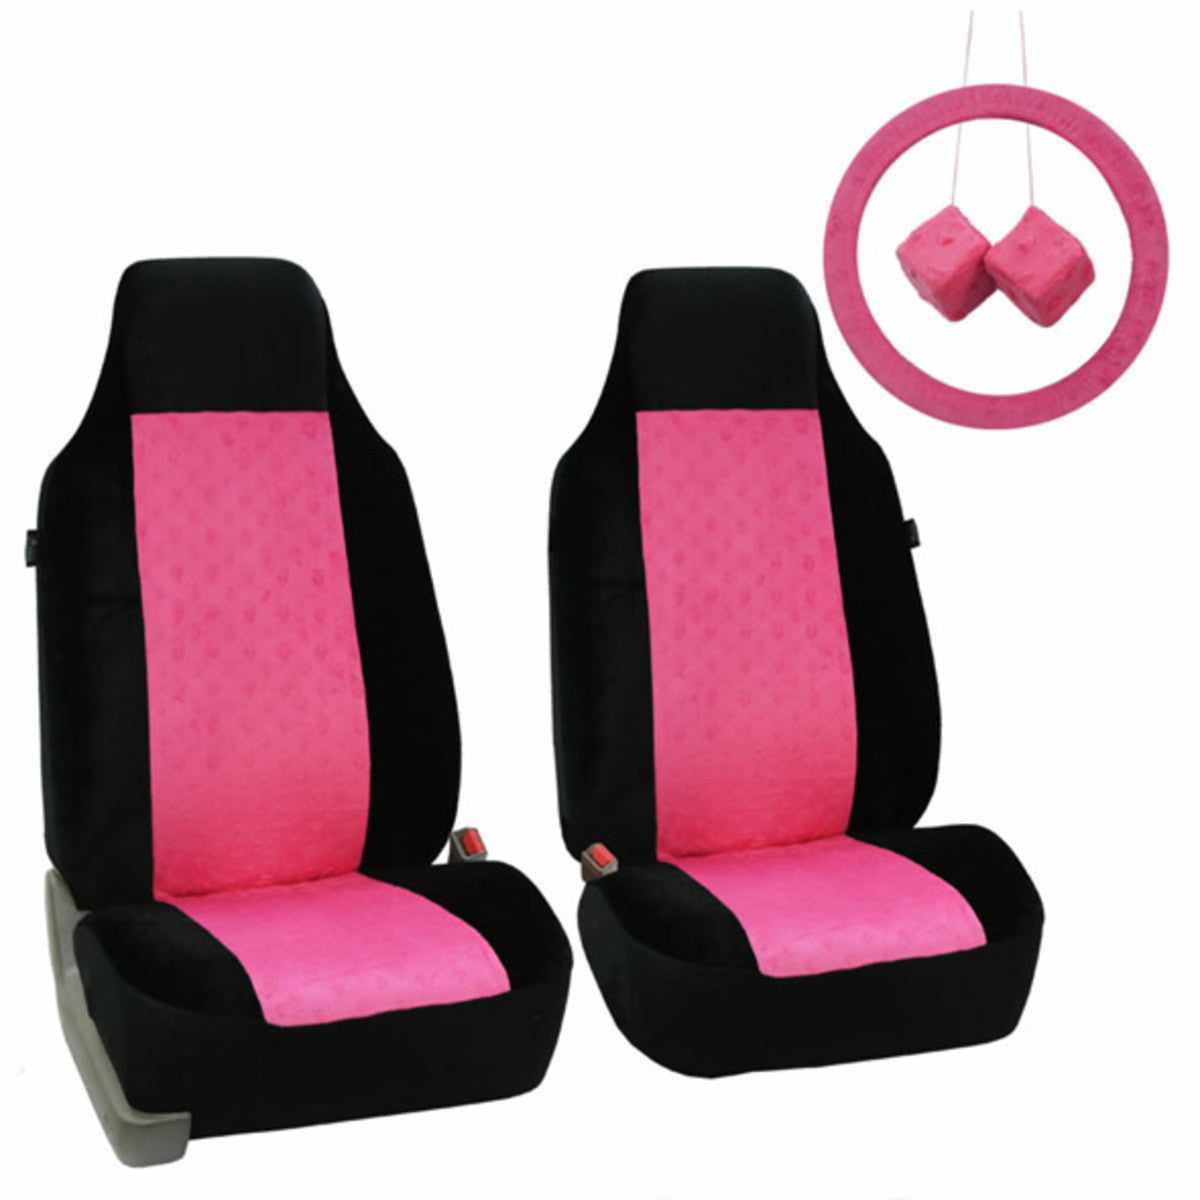 Heart Patterned Velour Seat Covers w/ Accessories - Front Set Black